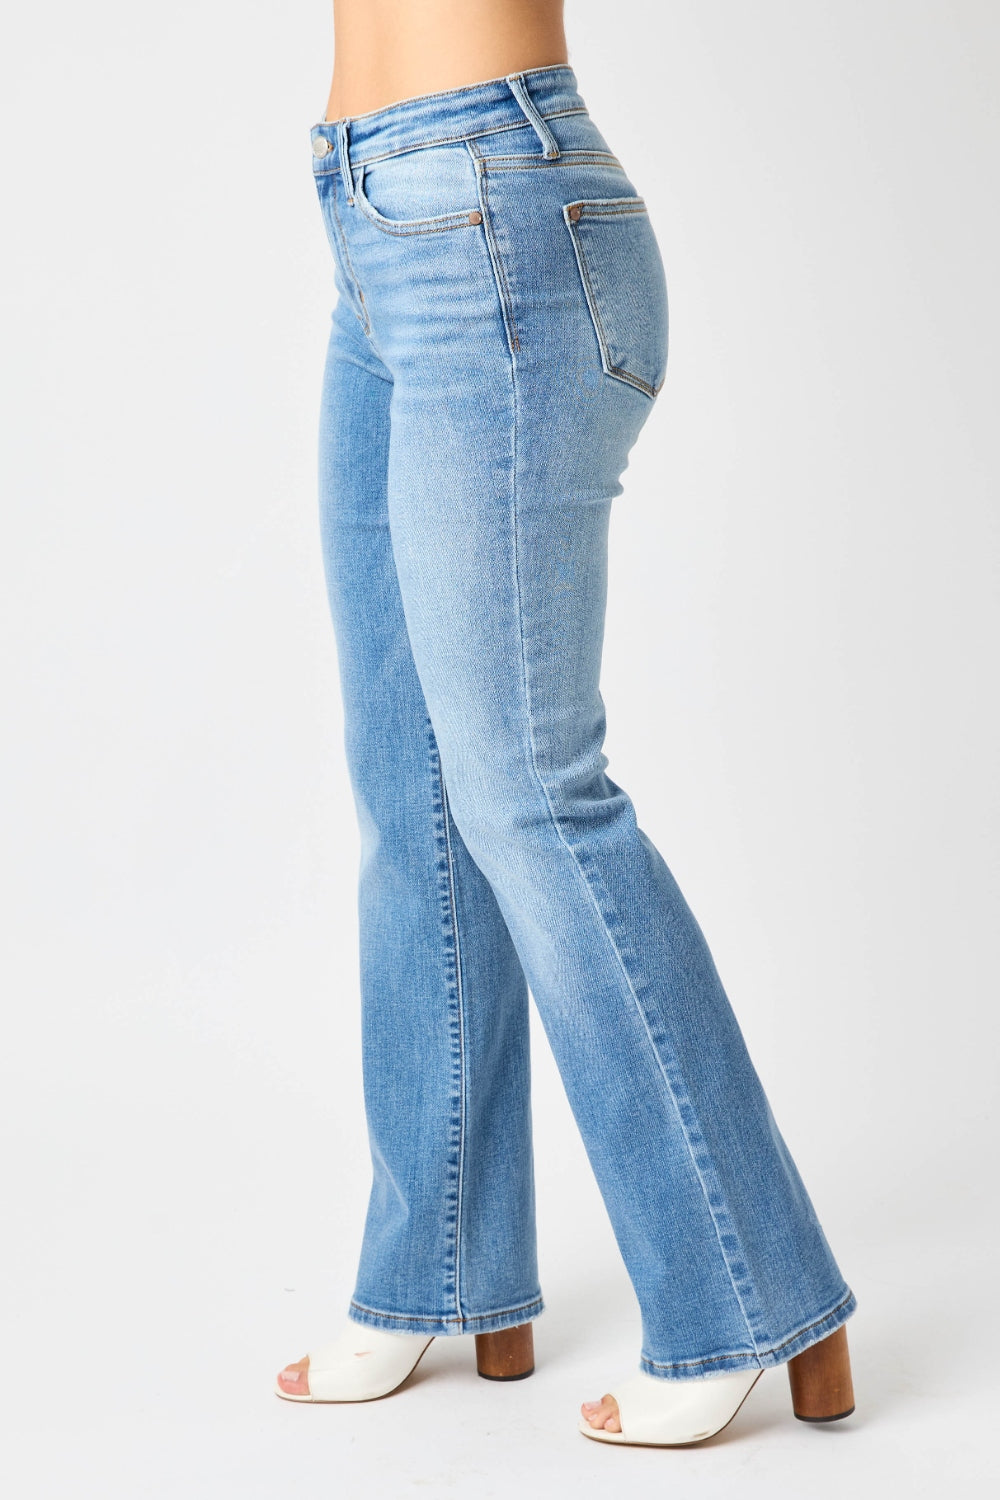 These high waist straight jeans are a timeless and classic wardrobe essential. The high waist design elongates the legs and provides a flattering silhouette. The straight leg cut offers a versatile and polished look that is easy to style. Pair them with a tucked-in blouse or a cropped top for a chic outfit. 0-24W